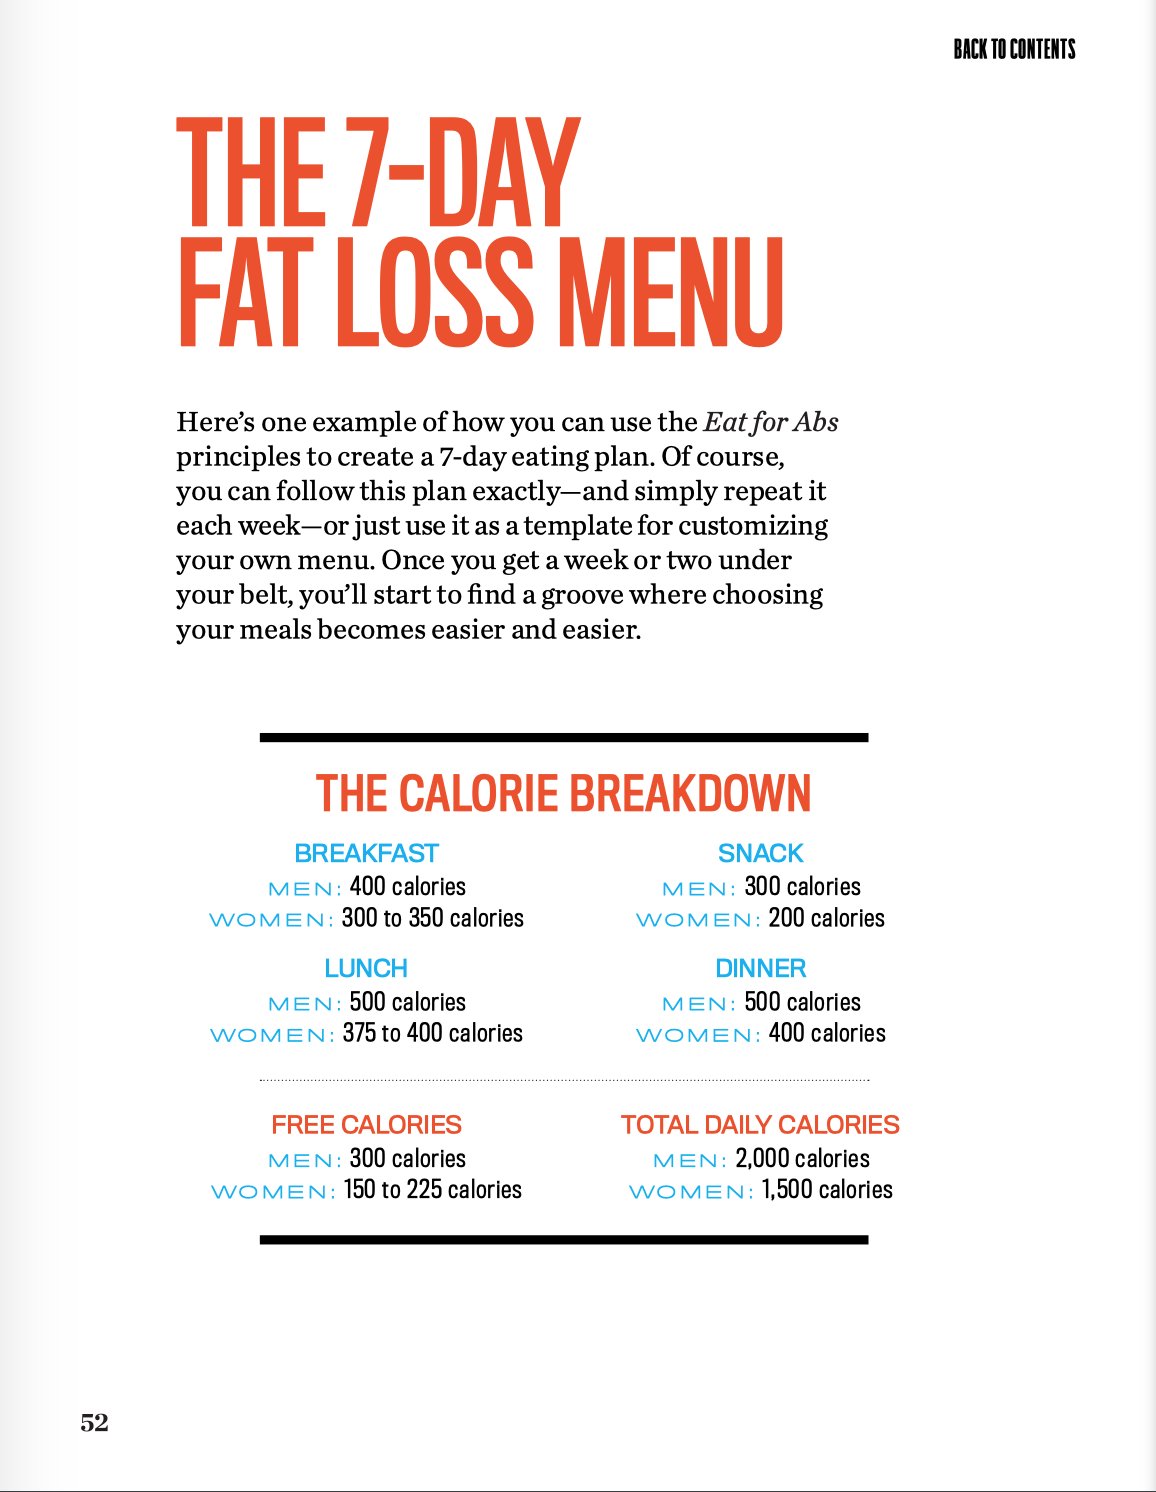 Here'S How To Get Our Exclusive 'Eat For Abs' Meal Plan Pdf